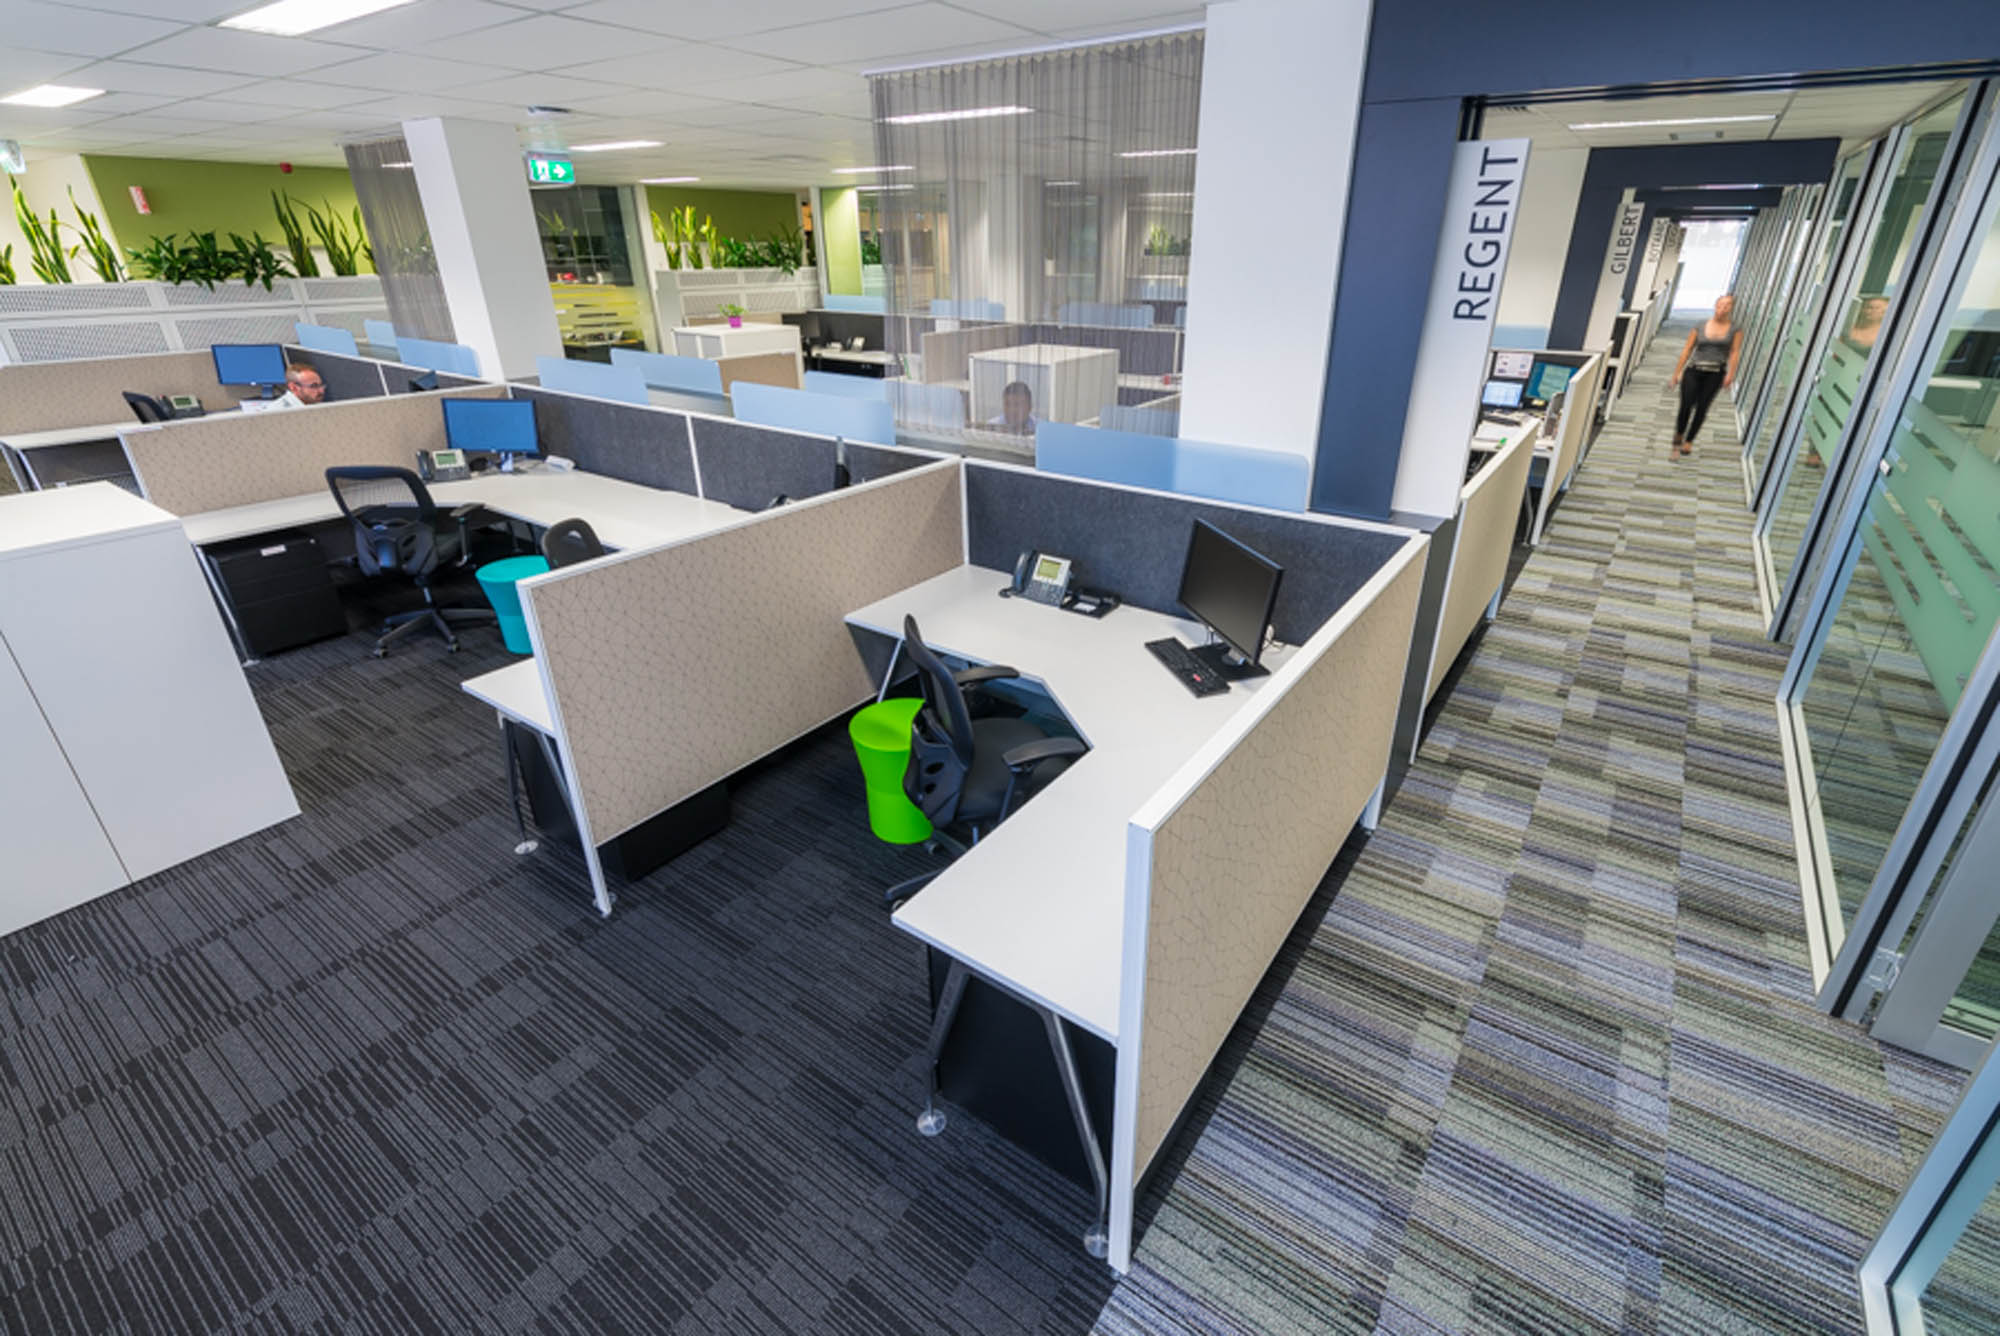 bdo adelaide office workplace fitout